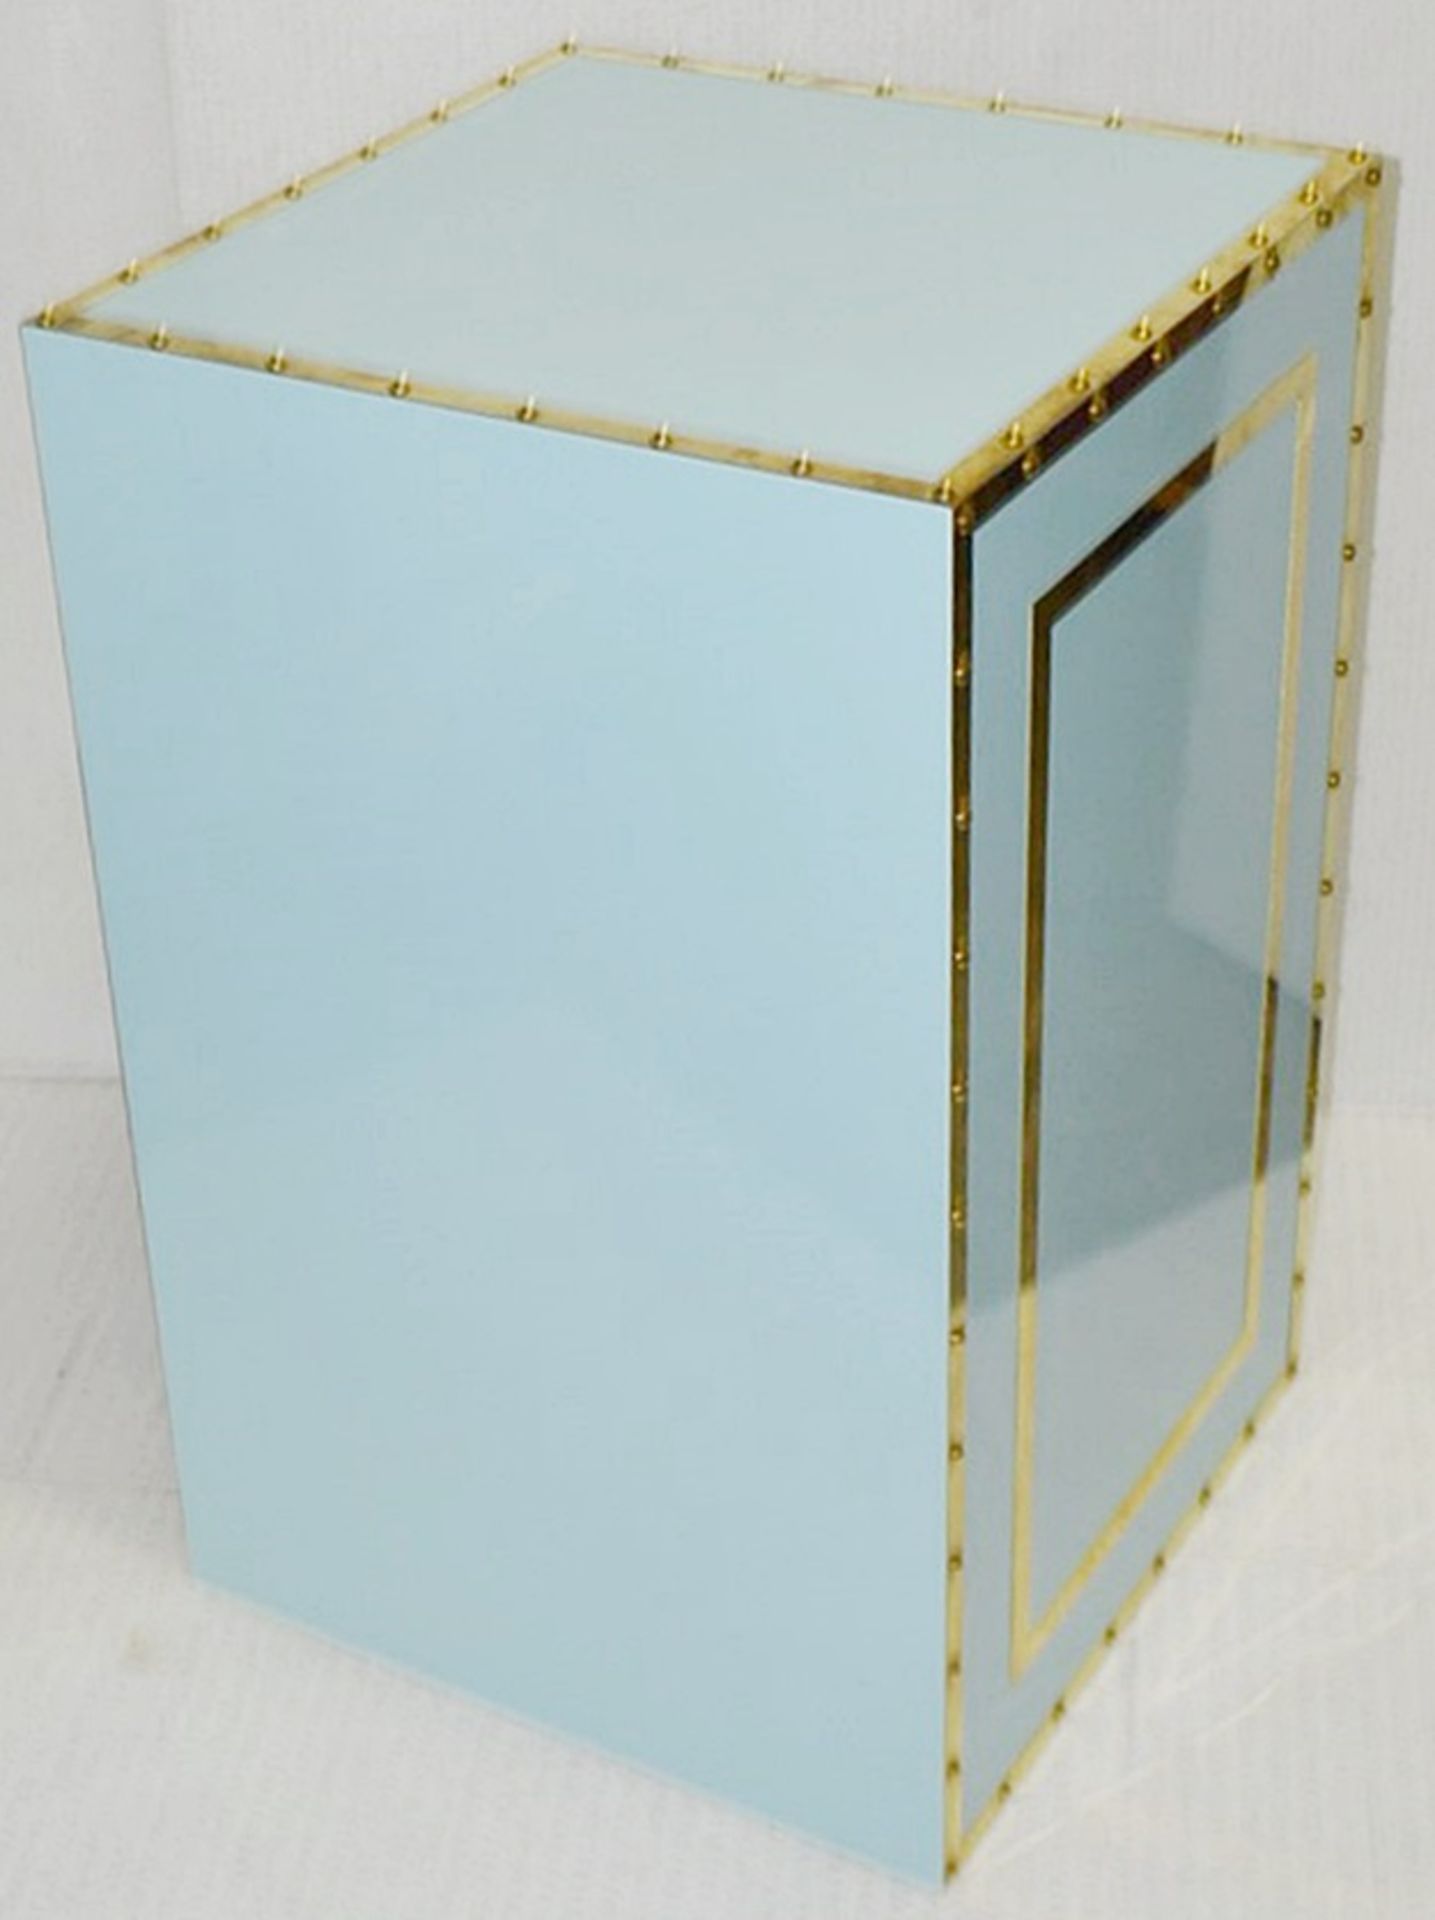 1 x Opulent Bank Vault Safe-style Shop Display Plinth In Tiffany Blue With Gold Trim - Image 5 of 6